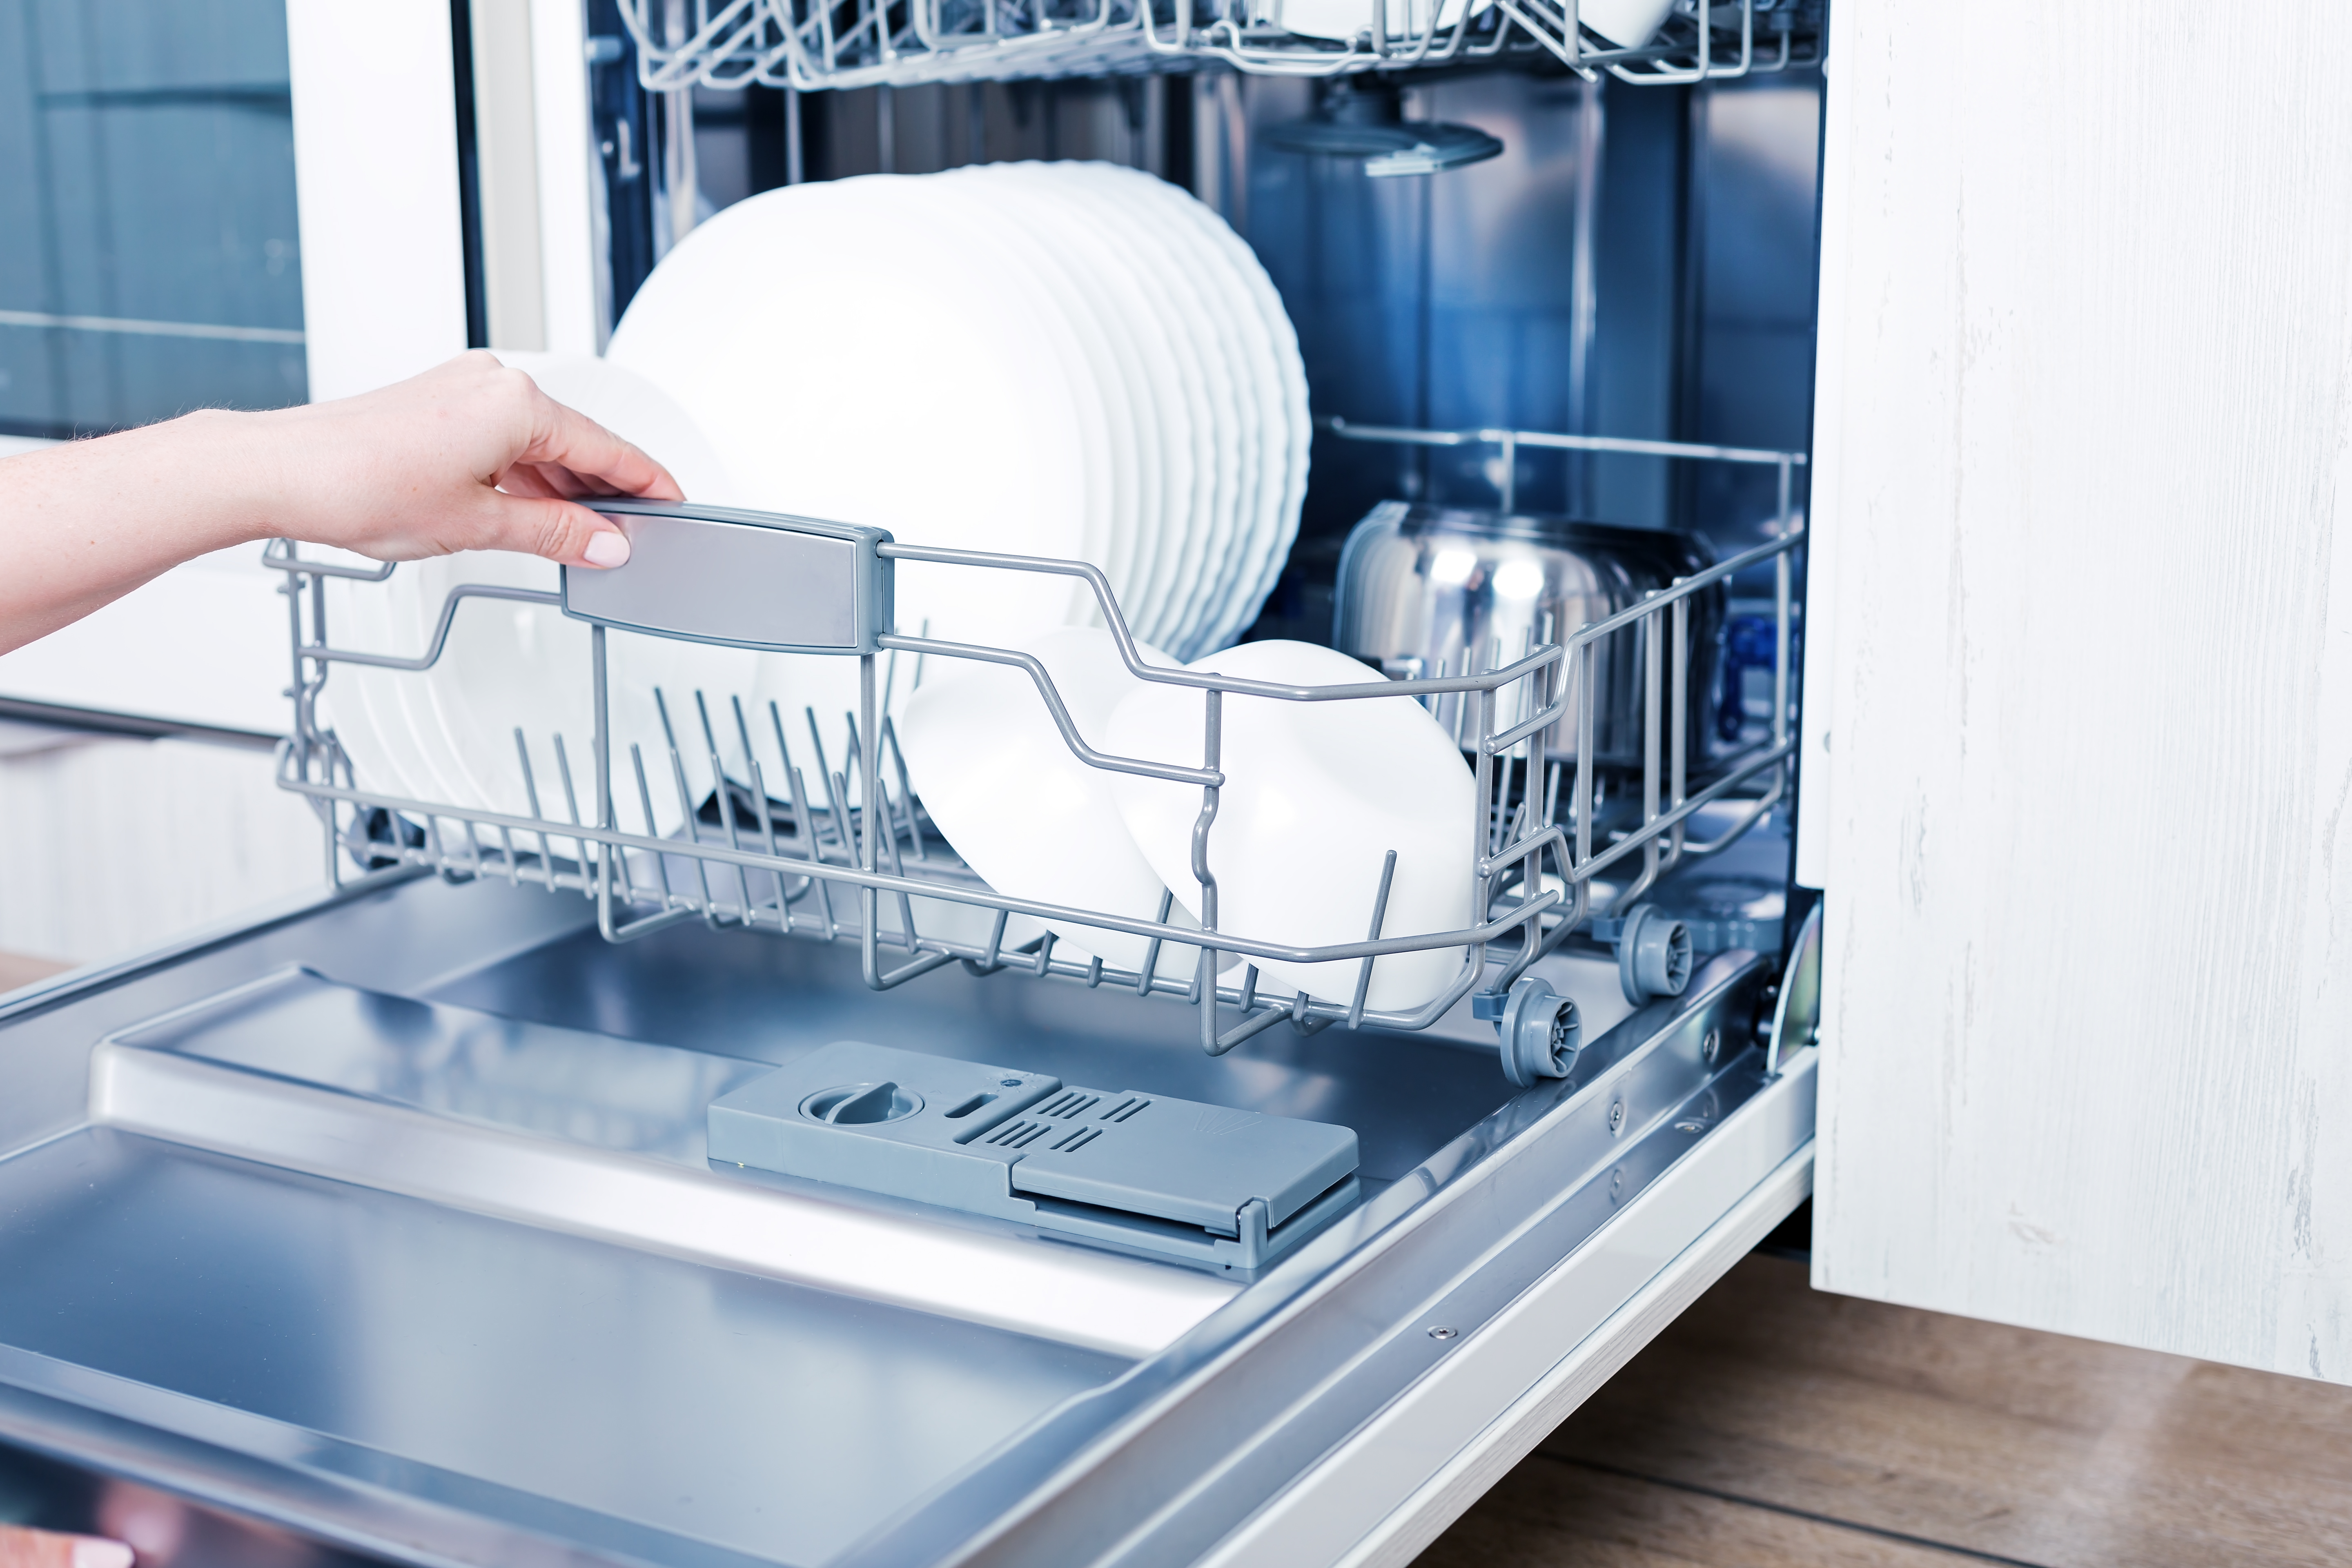 How To Get Dishes Dry In The Dishwasher-Easy Tutorial 